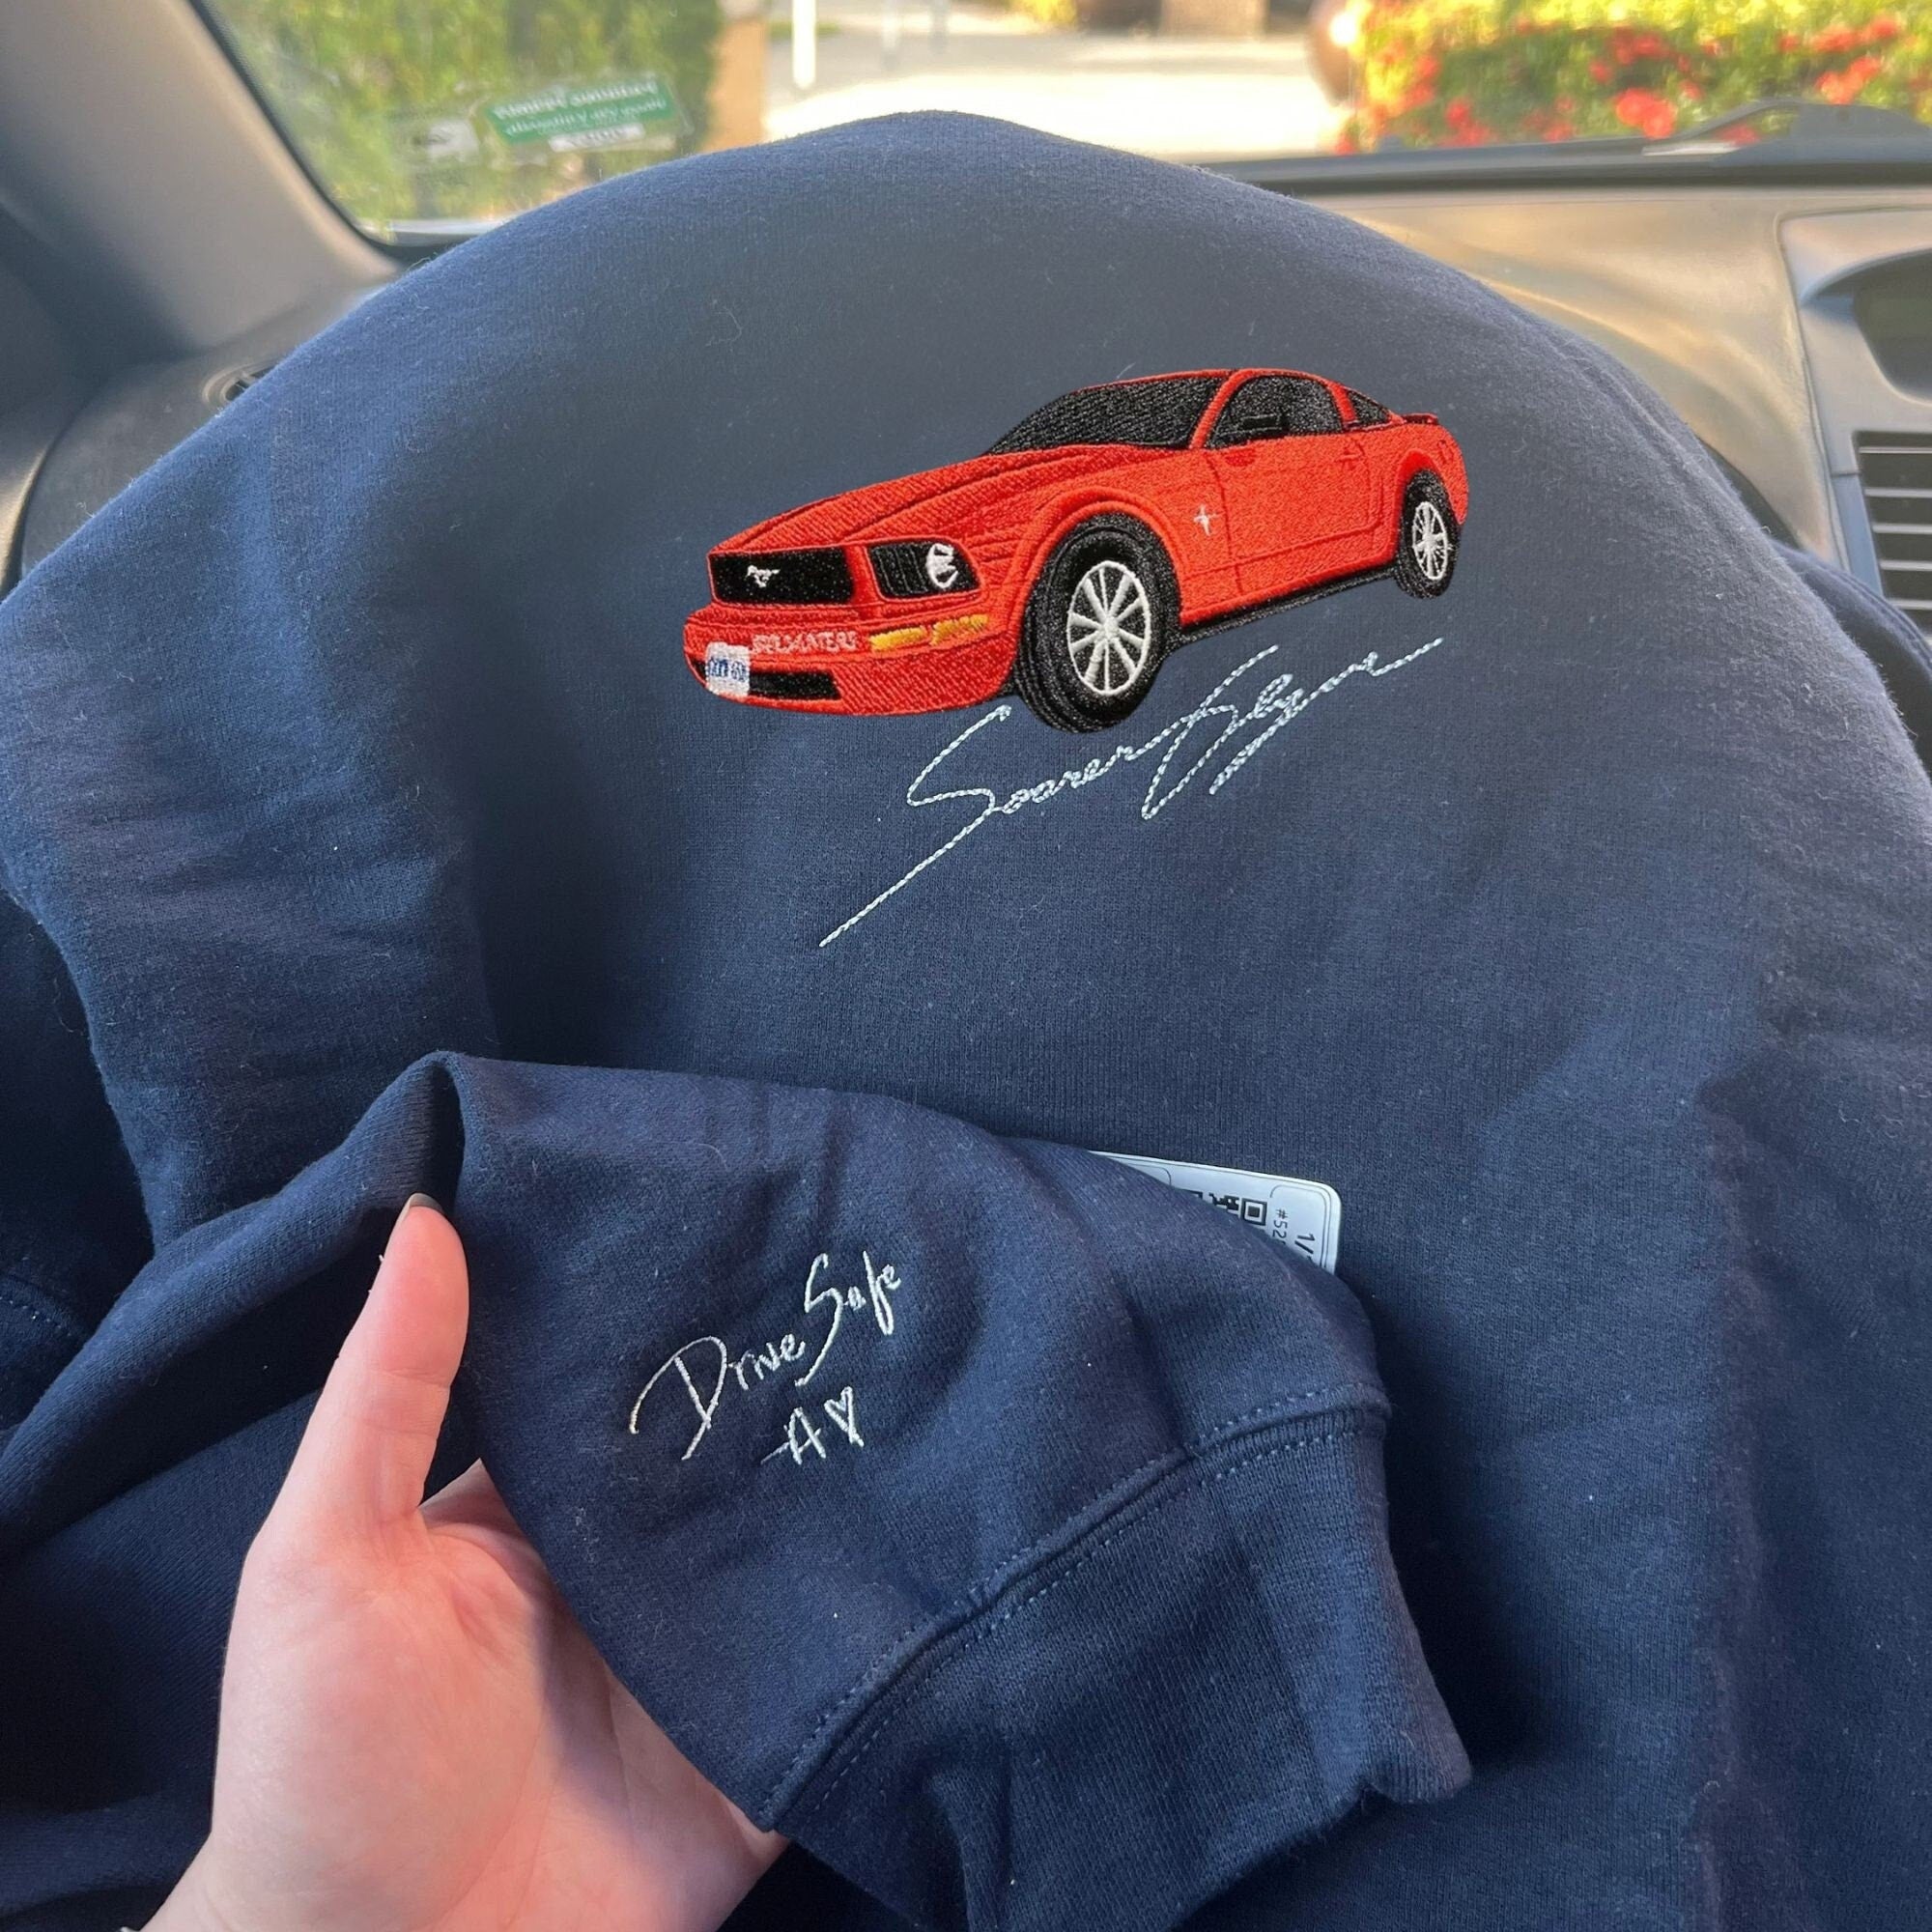 Customized Car Craft Hoodies, Car Enthusiast Gifts (Customized free)